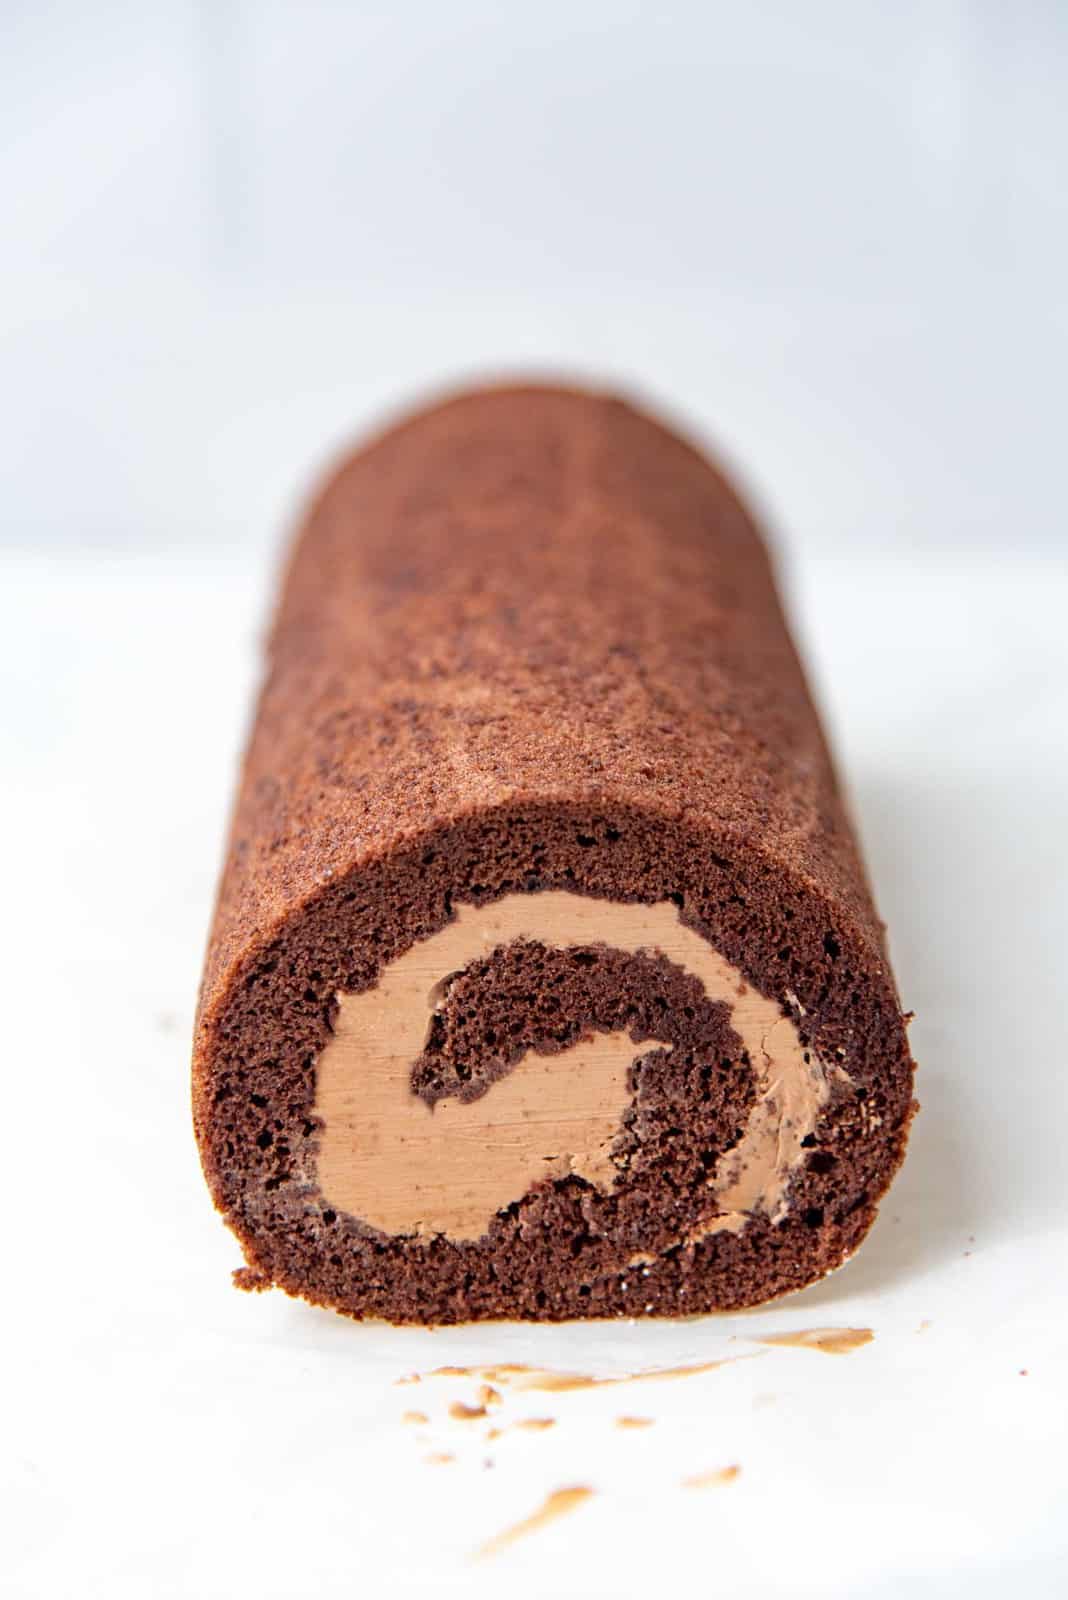 A rolled chocolate swiss roll after edges trimmed